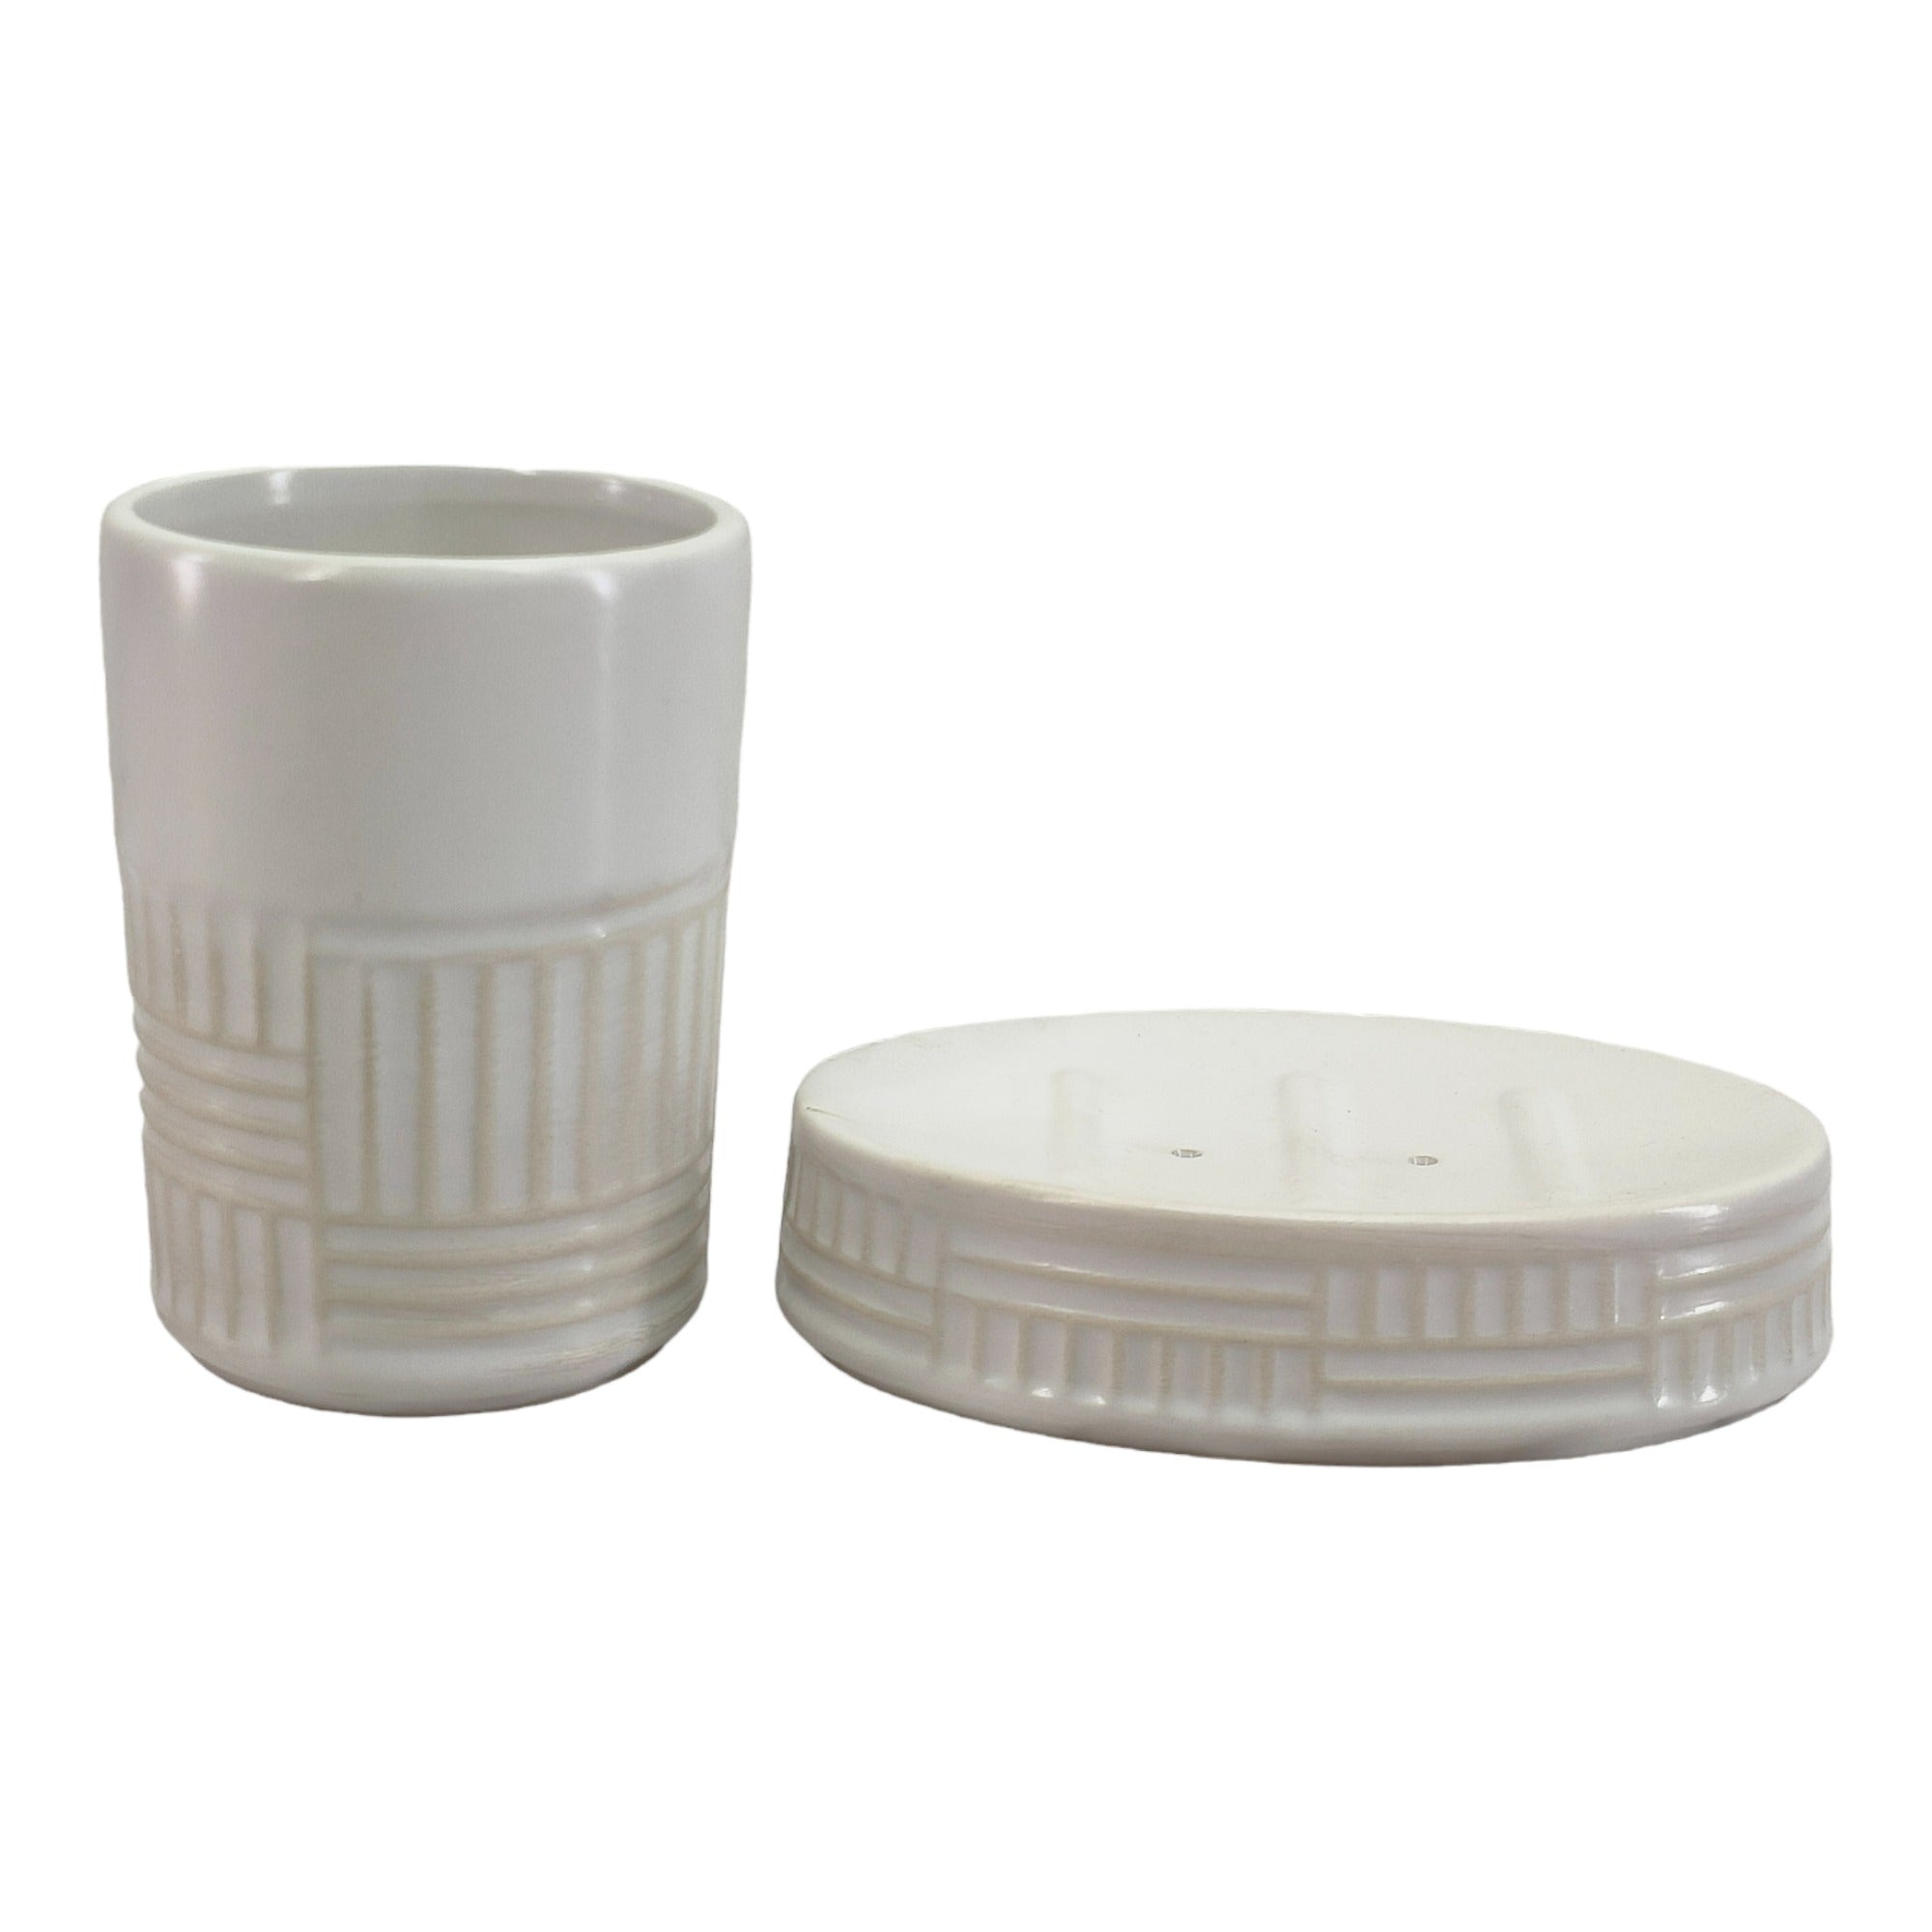 Ceramic Soap Dish Set with Toothbrush Holder, Set of 2 Bathroom Accessories for Home (C2099)